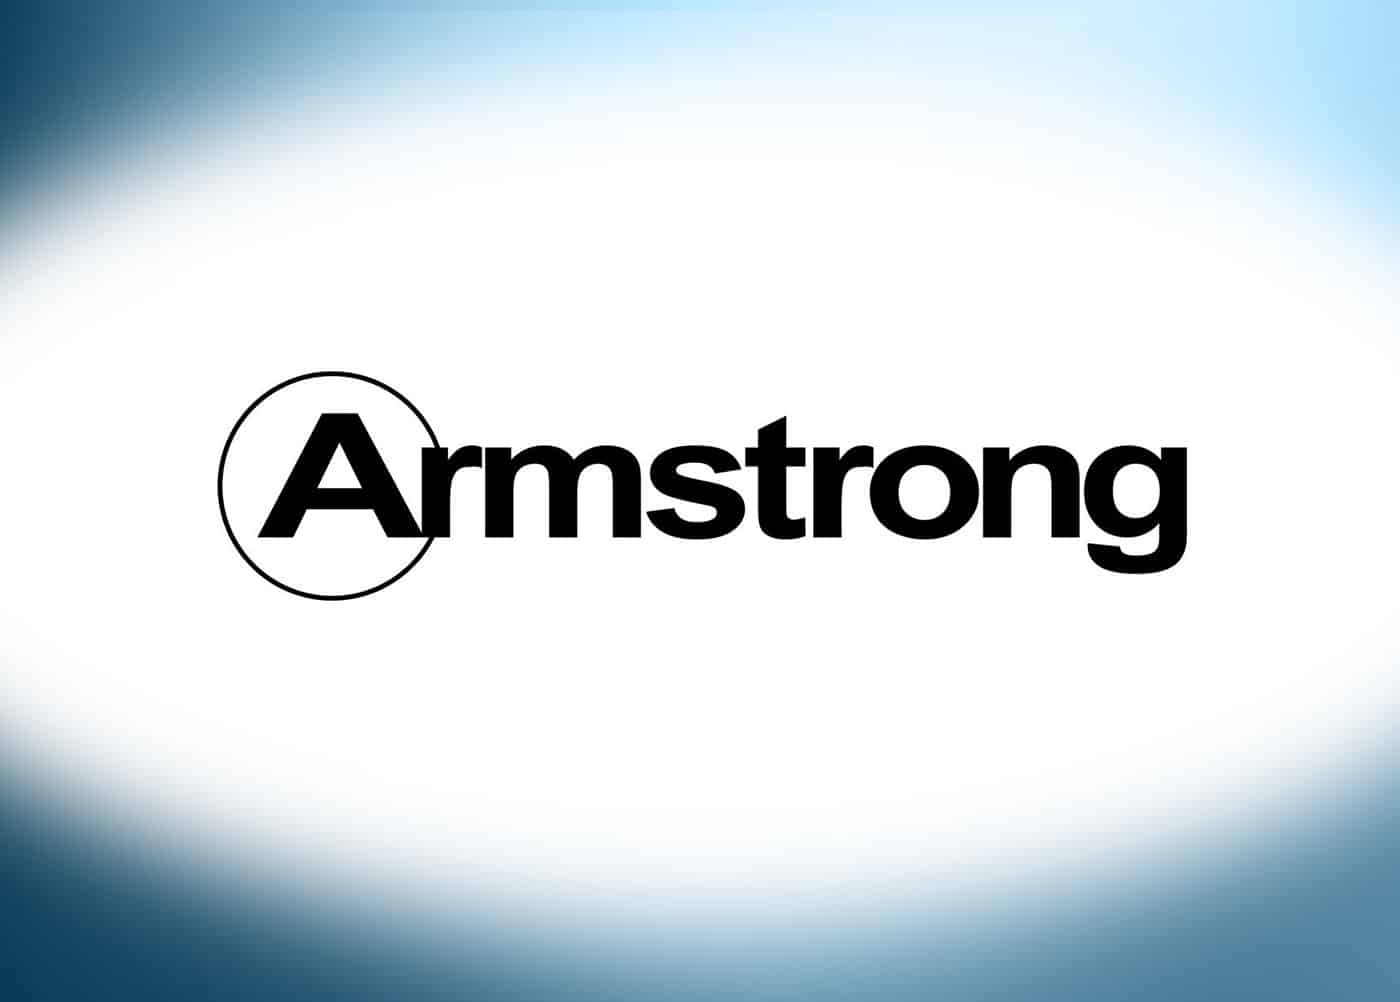 Armstrong World Industries Asbestos Use Products Litigation More